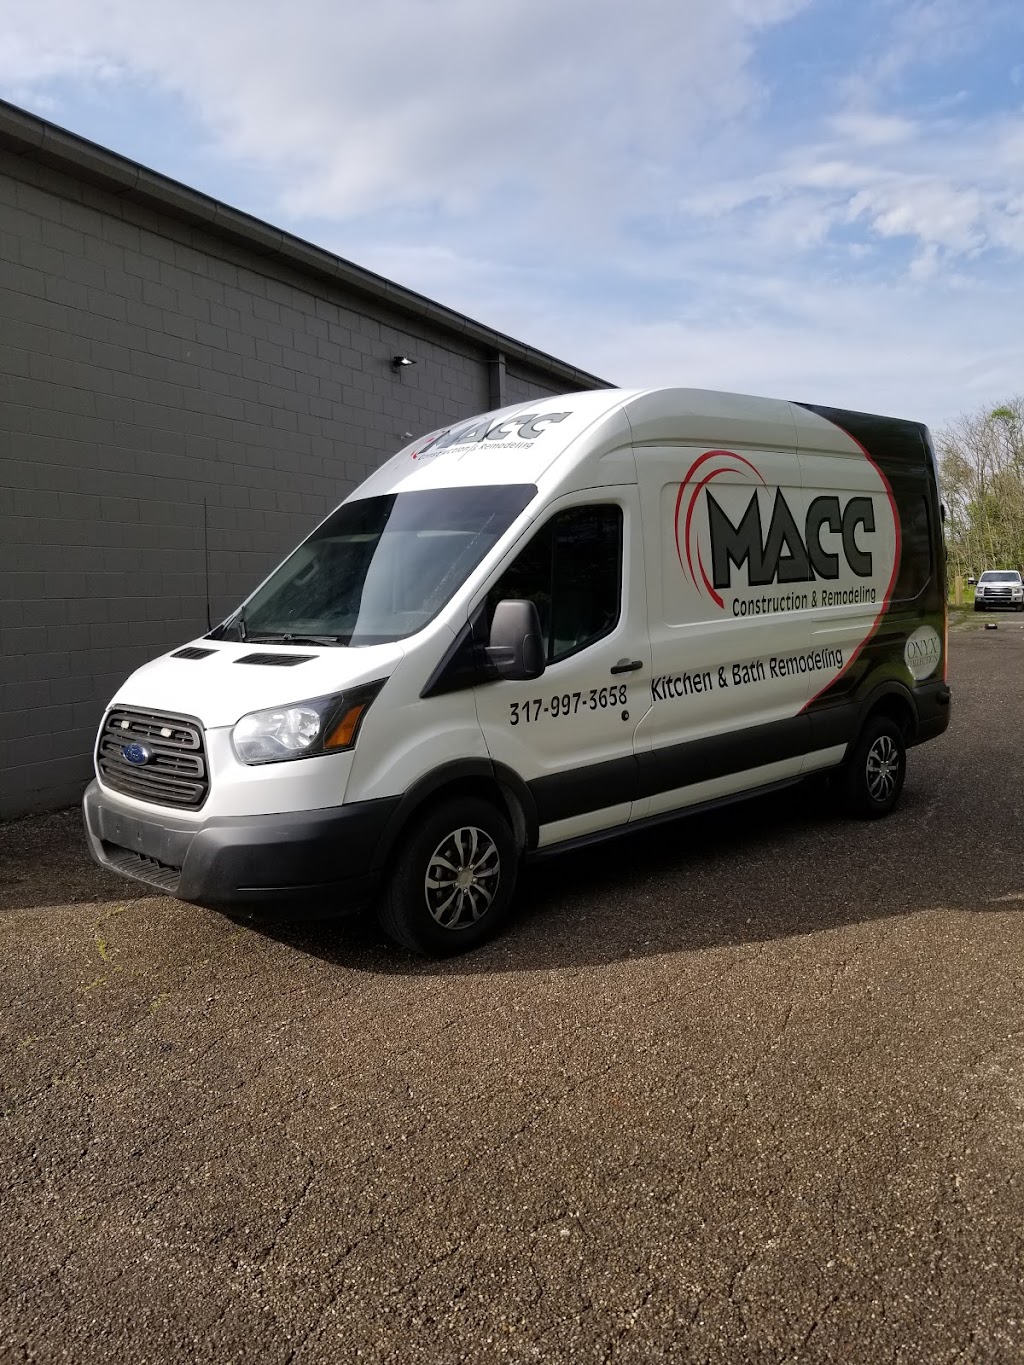 MACC Construction & Remodeling, LLC | Martinsville, IN 46151, USA | Phone: (317) 997-3658